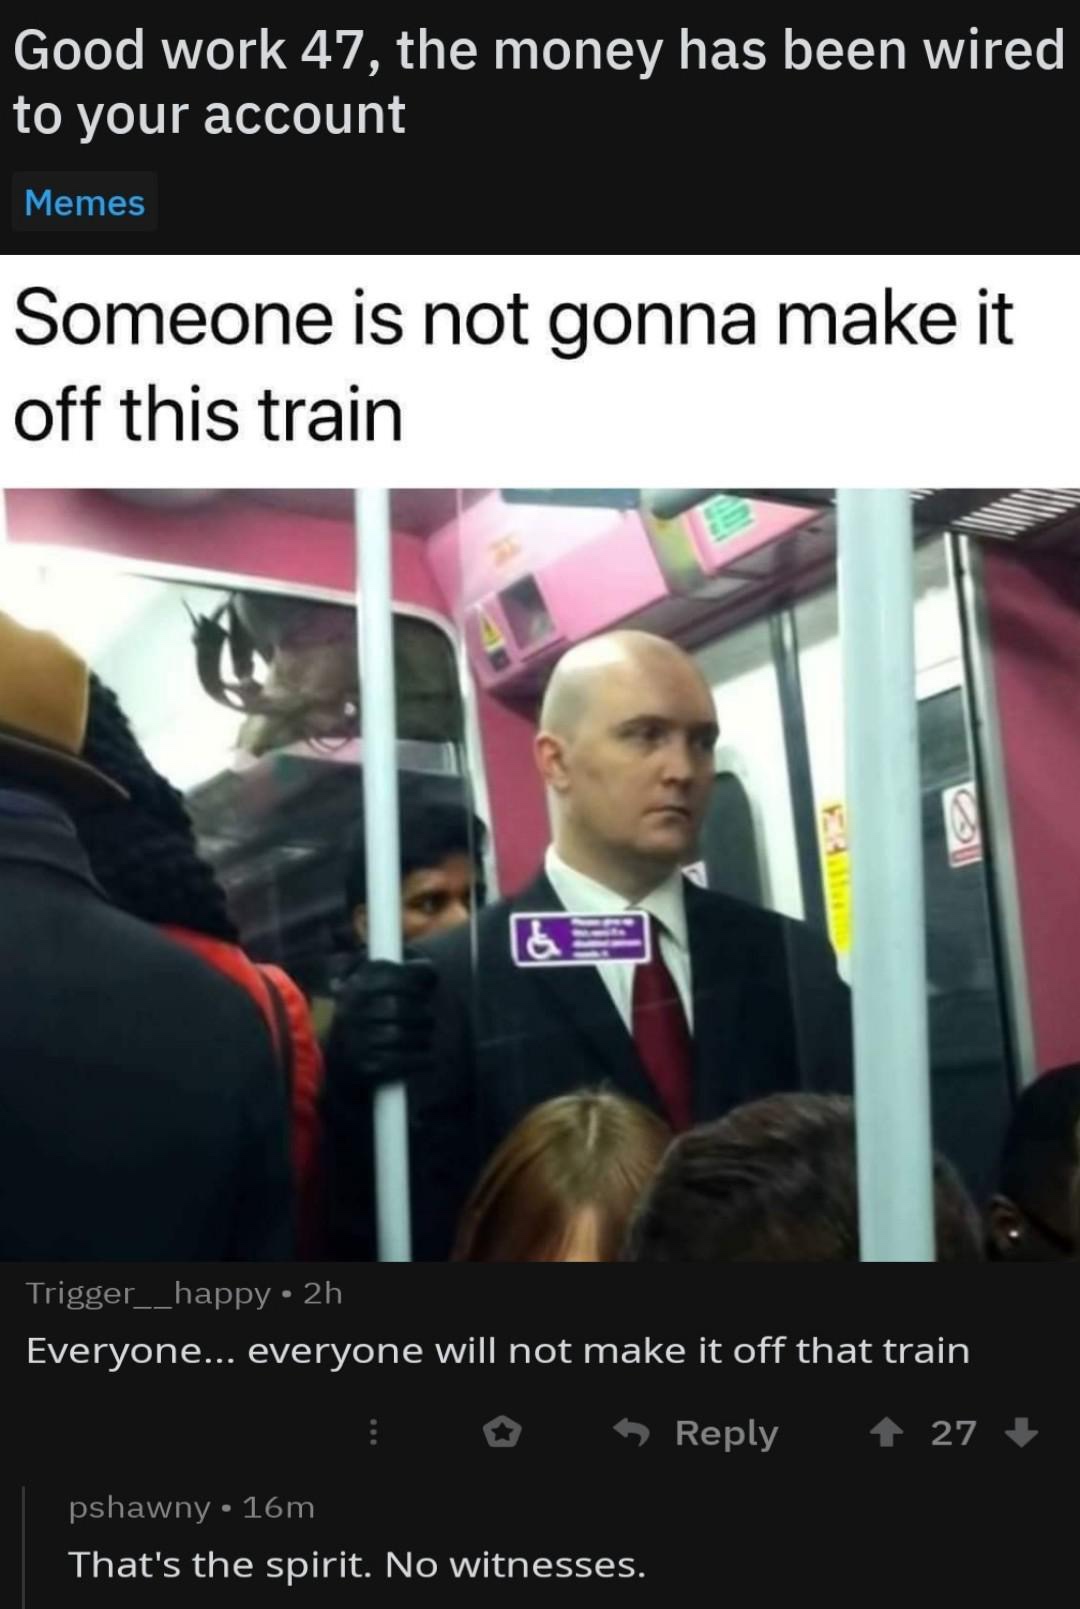 funny picture - hitman meme - Good work 47, the money has been wired to your account Memes Someone is not gonna make it off this train Trigger__happy 2h Everyone... everyone will not make it off that train 27 pshawny 16m That's the spirit. No witnesses.